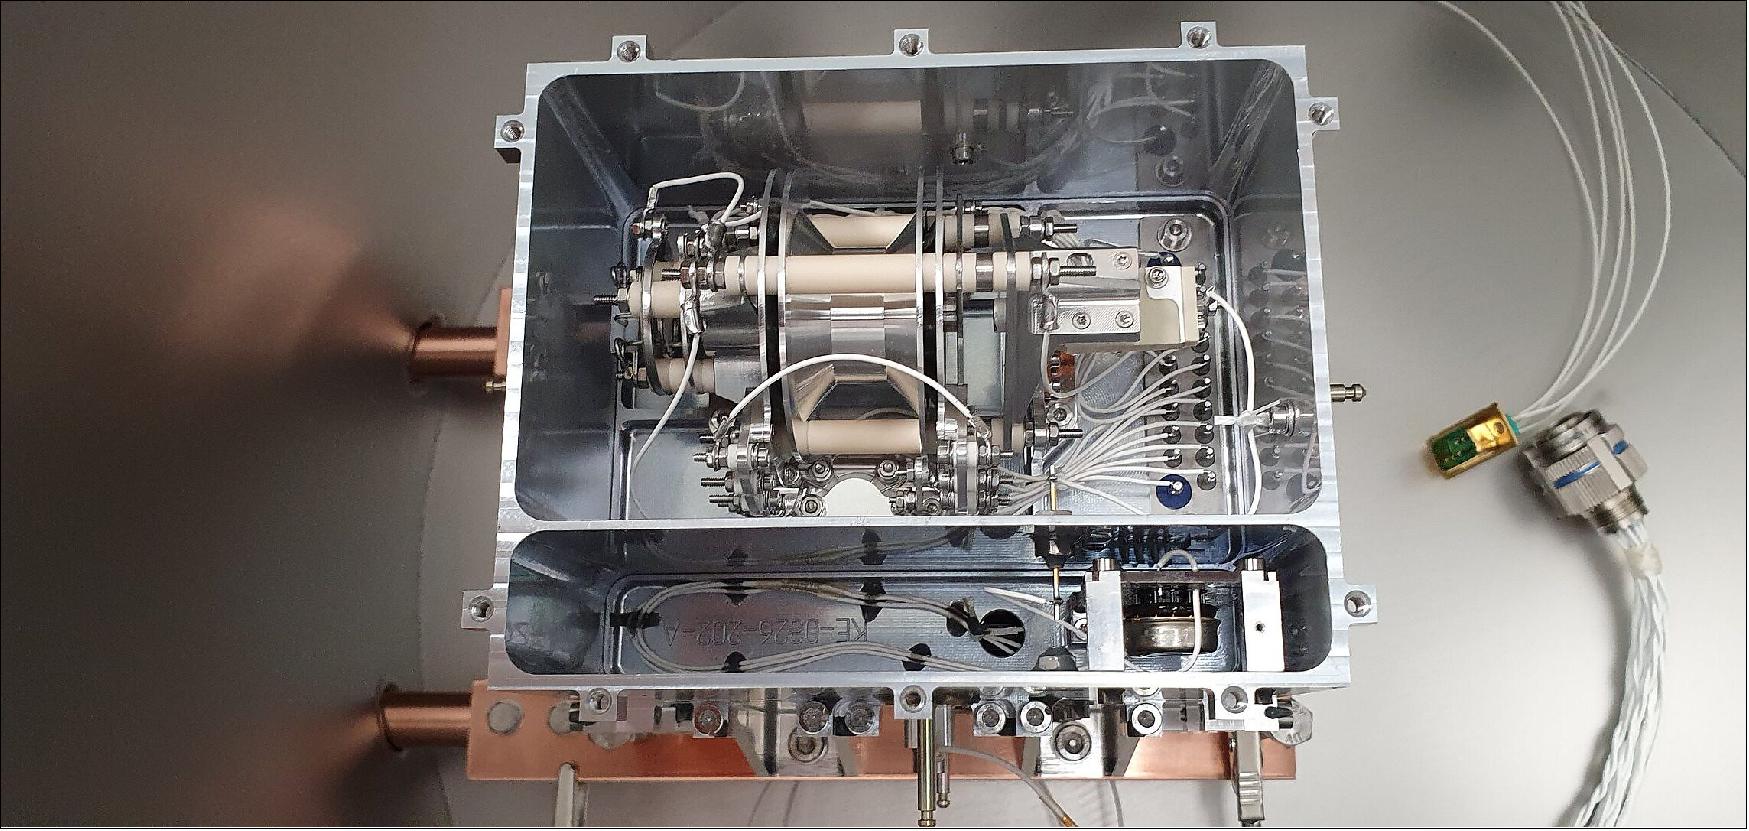 Figure 11: The heart of the EMS is visible in this image of the key sensor that will study the abundance of lunar water and water ice for upcoming missions to the Moon (image credit: The open University)